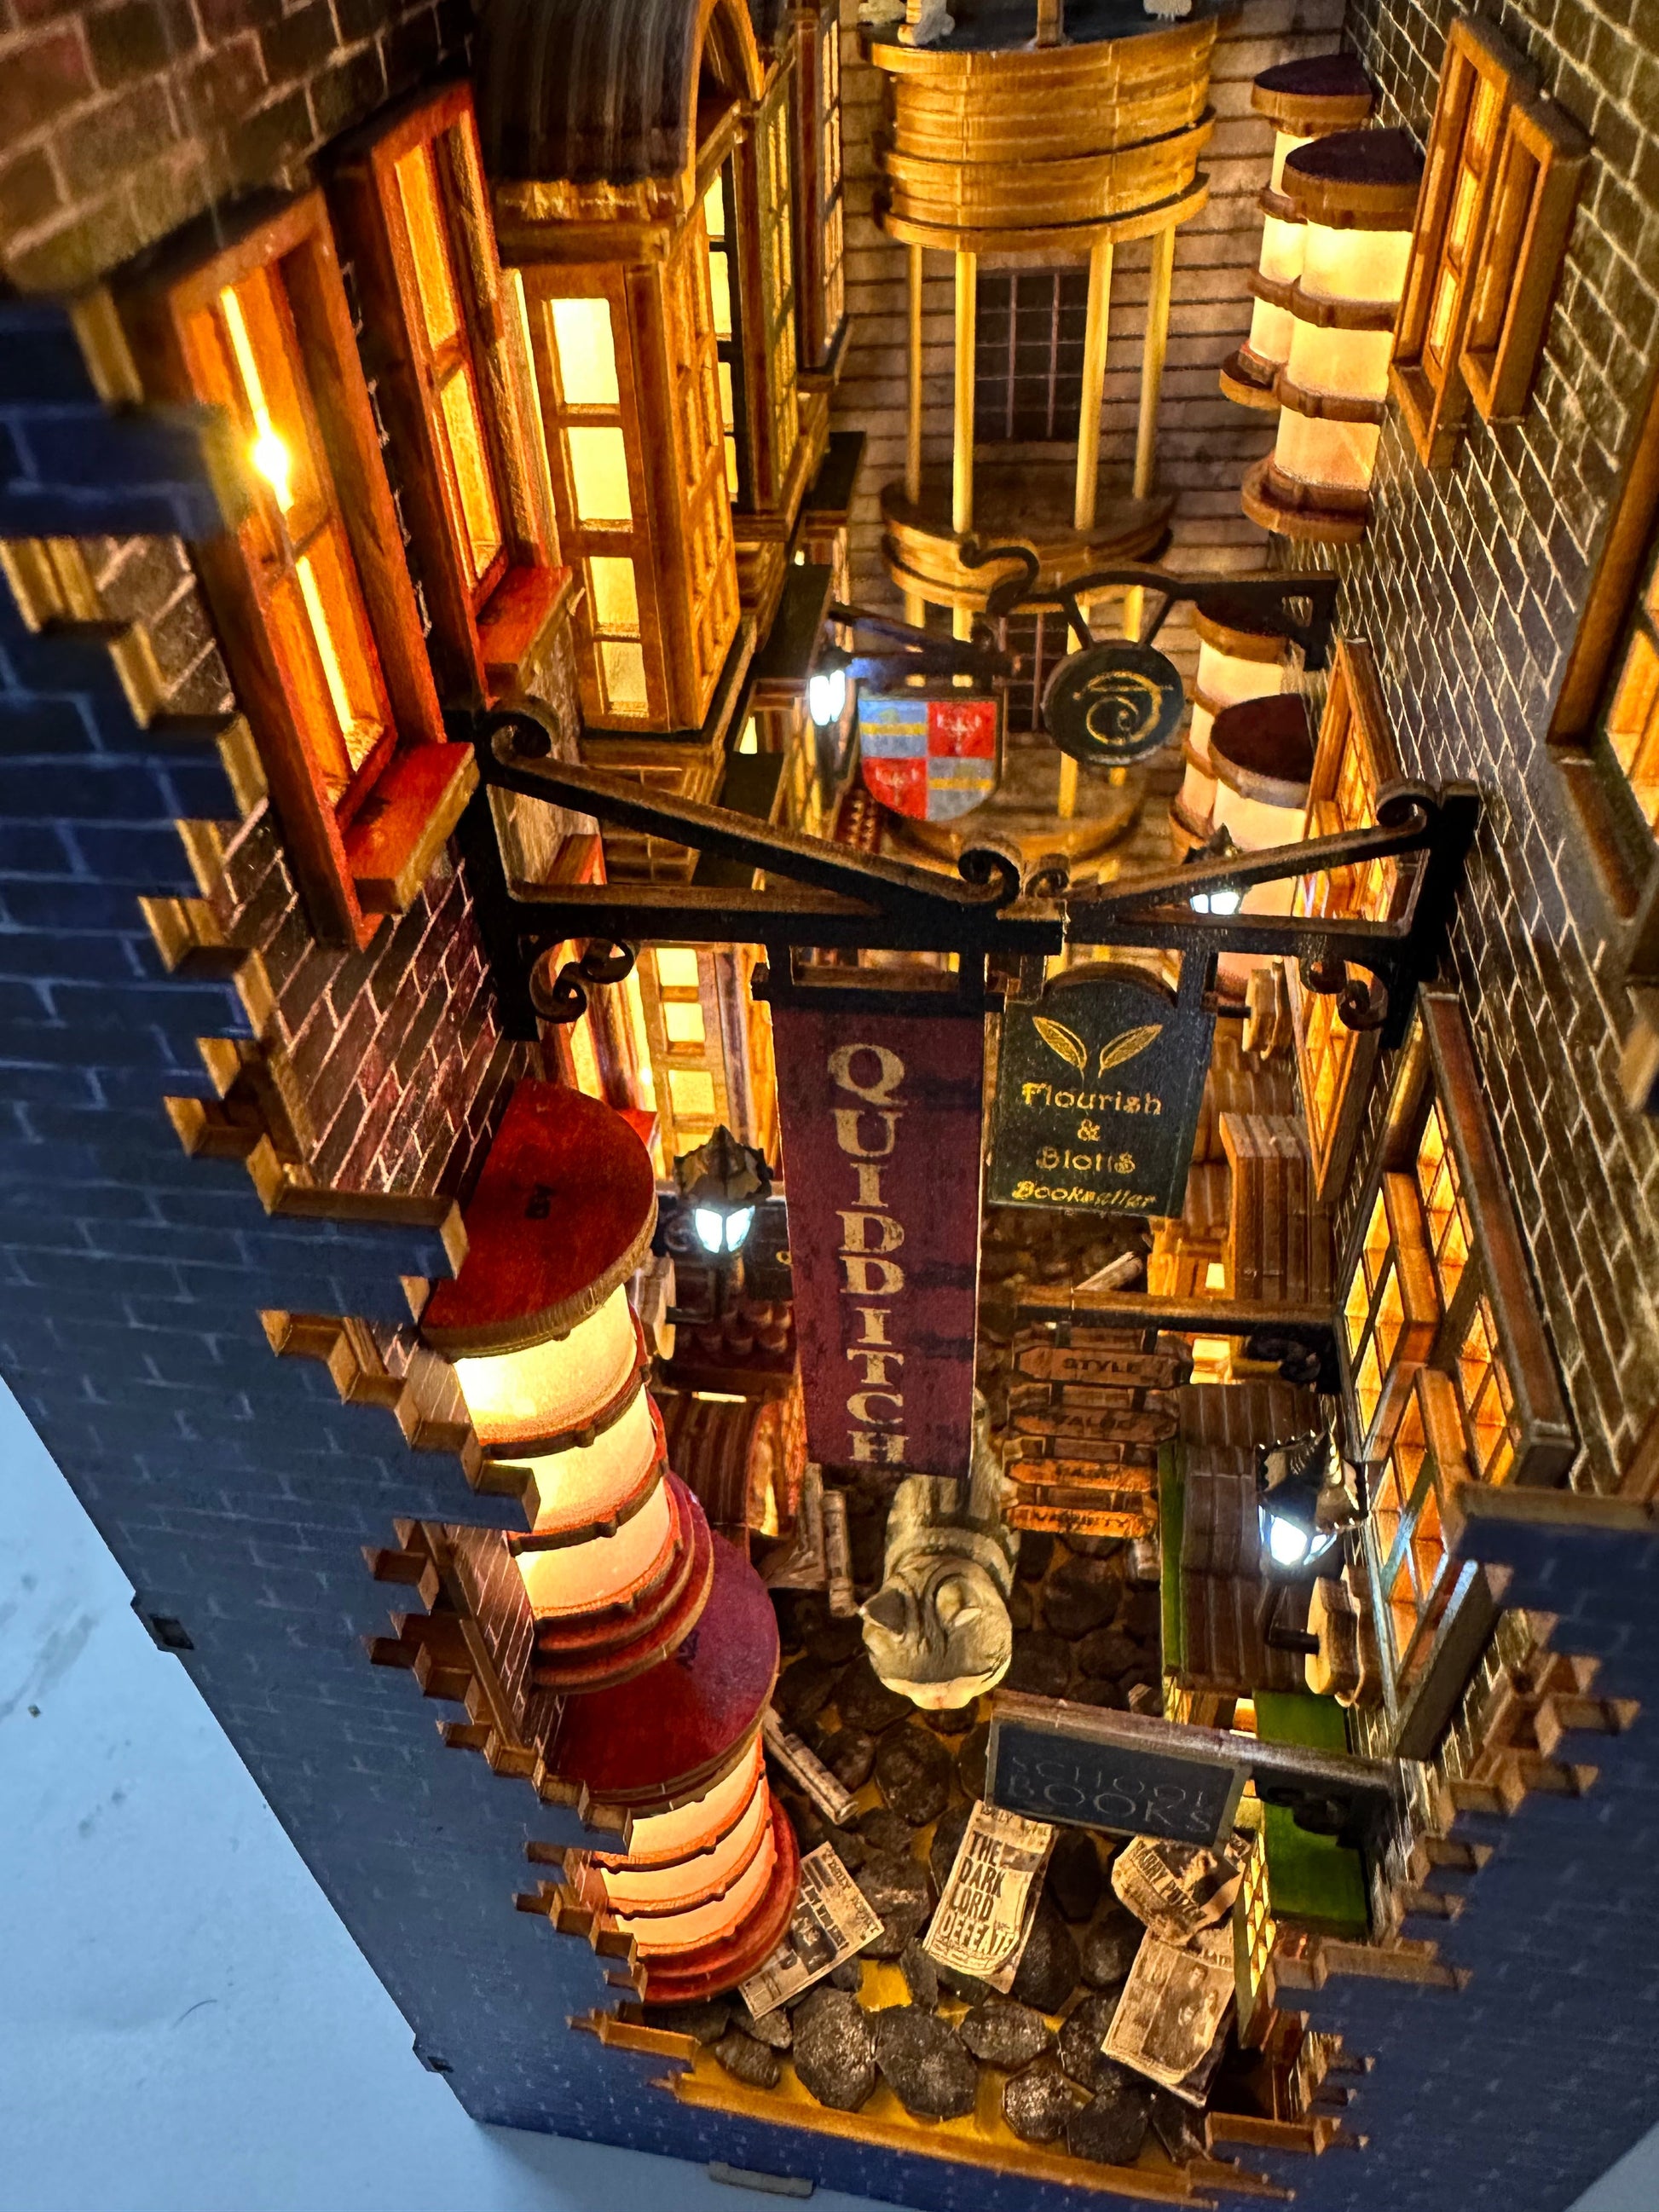 More visuals of my finished Harry Potter Diagon Alley book nook